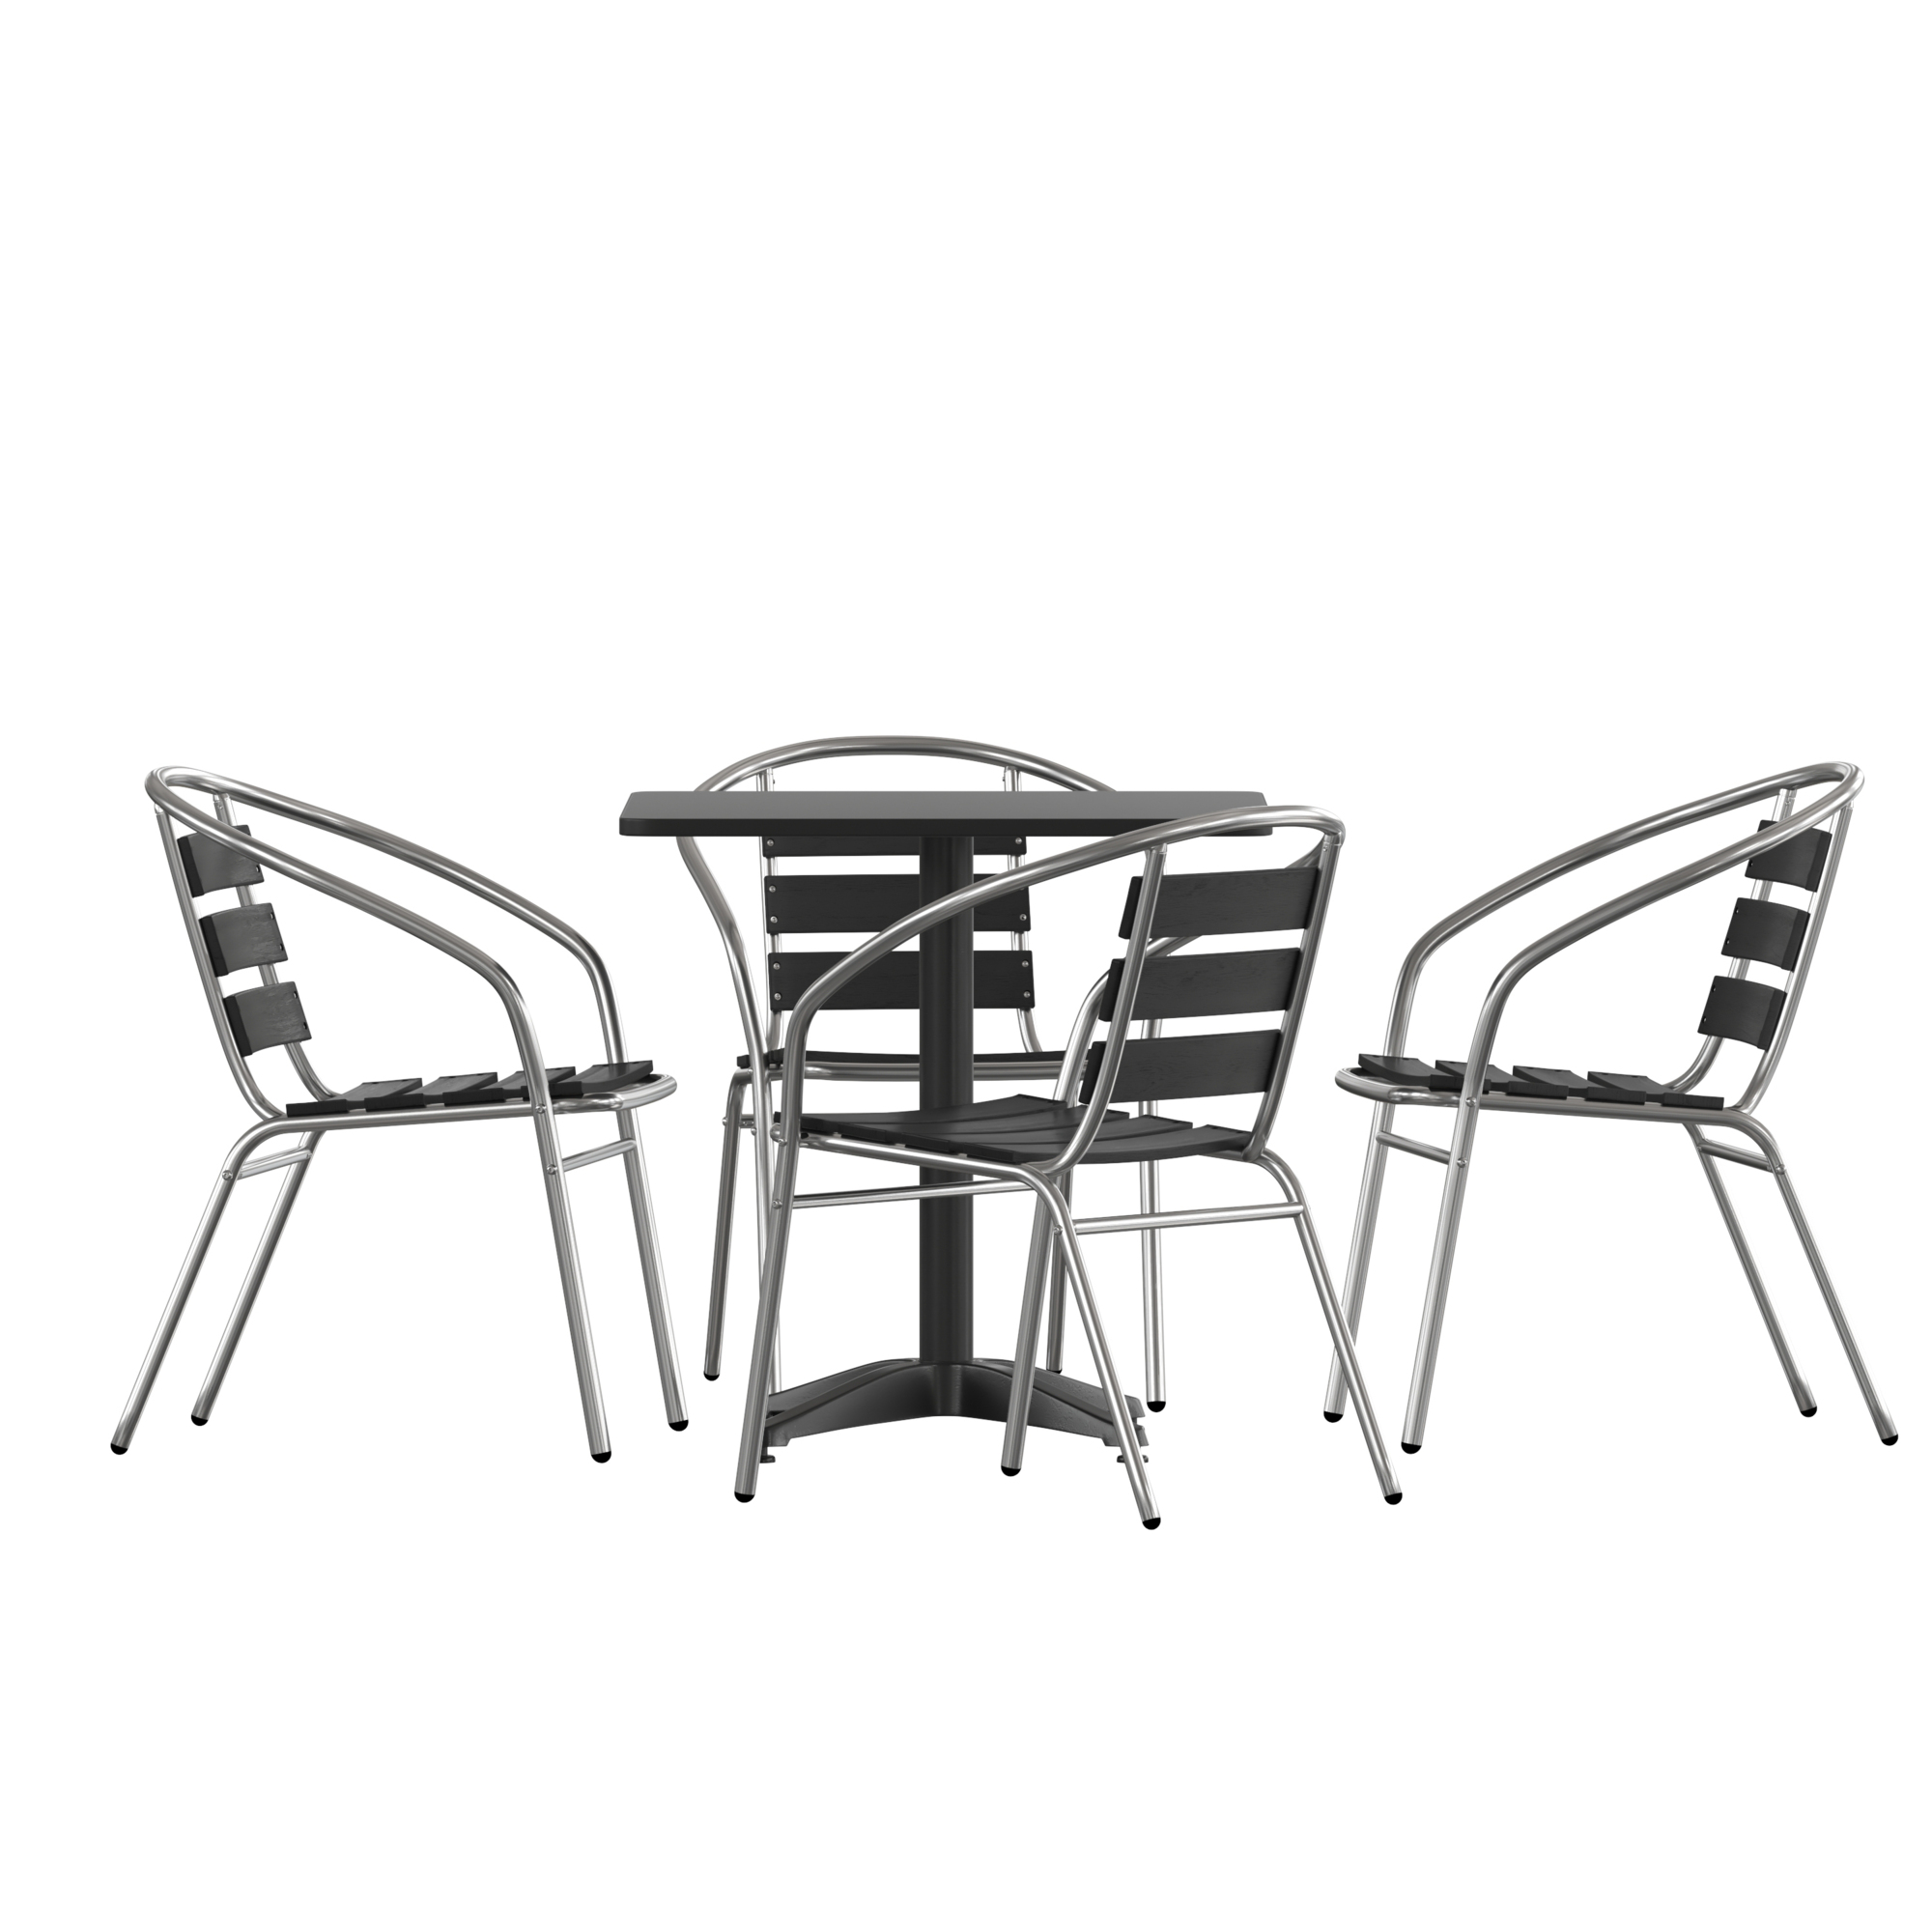 Flash Furniture, 27.5Inch SQ Glass Table - 4 Black Slat Back Chairs, Pieces (qty.) 5 Primary Color Black, Seating Capacity 4 Model THAL28SQ017BK4